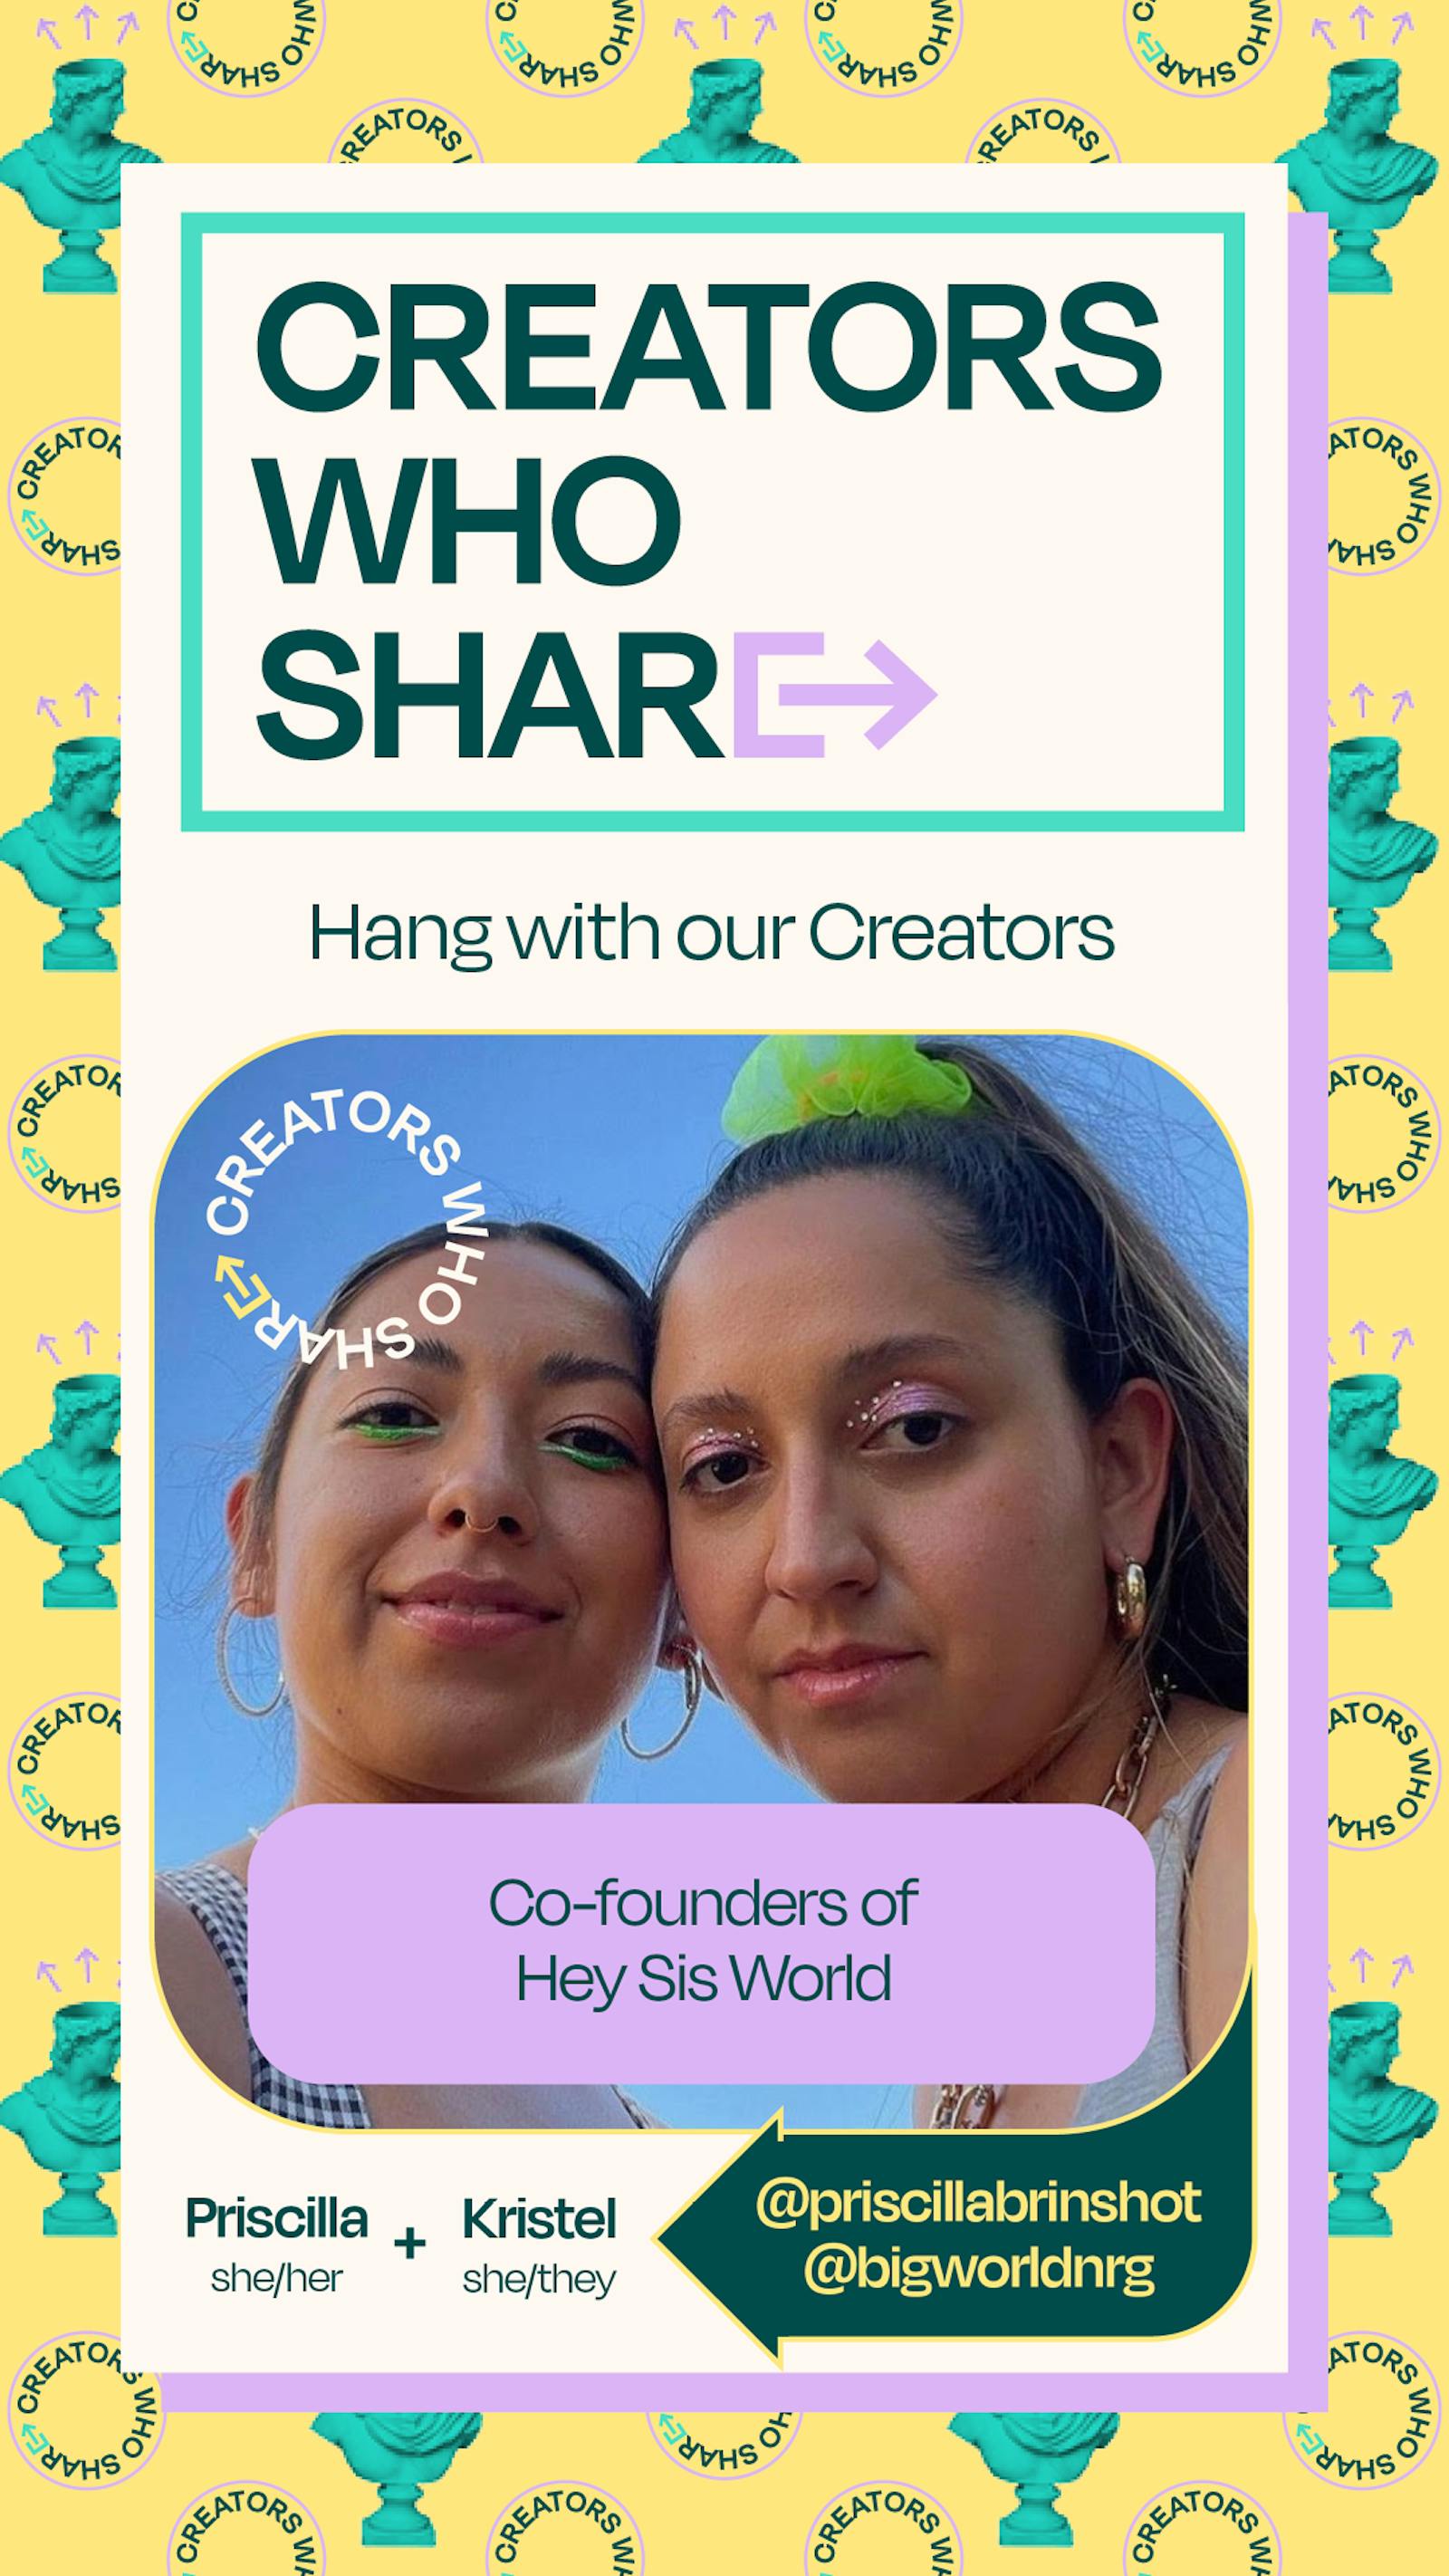 Creator's Who Share IG Live w/ Co-founders of Hey Sis World, Priscilla + Kristel Brinshot